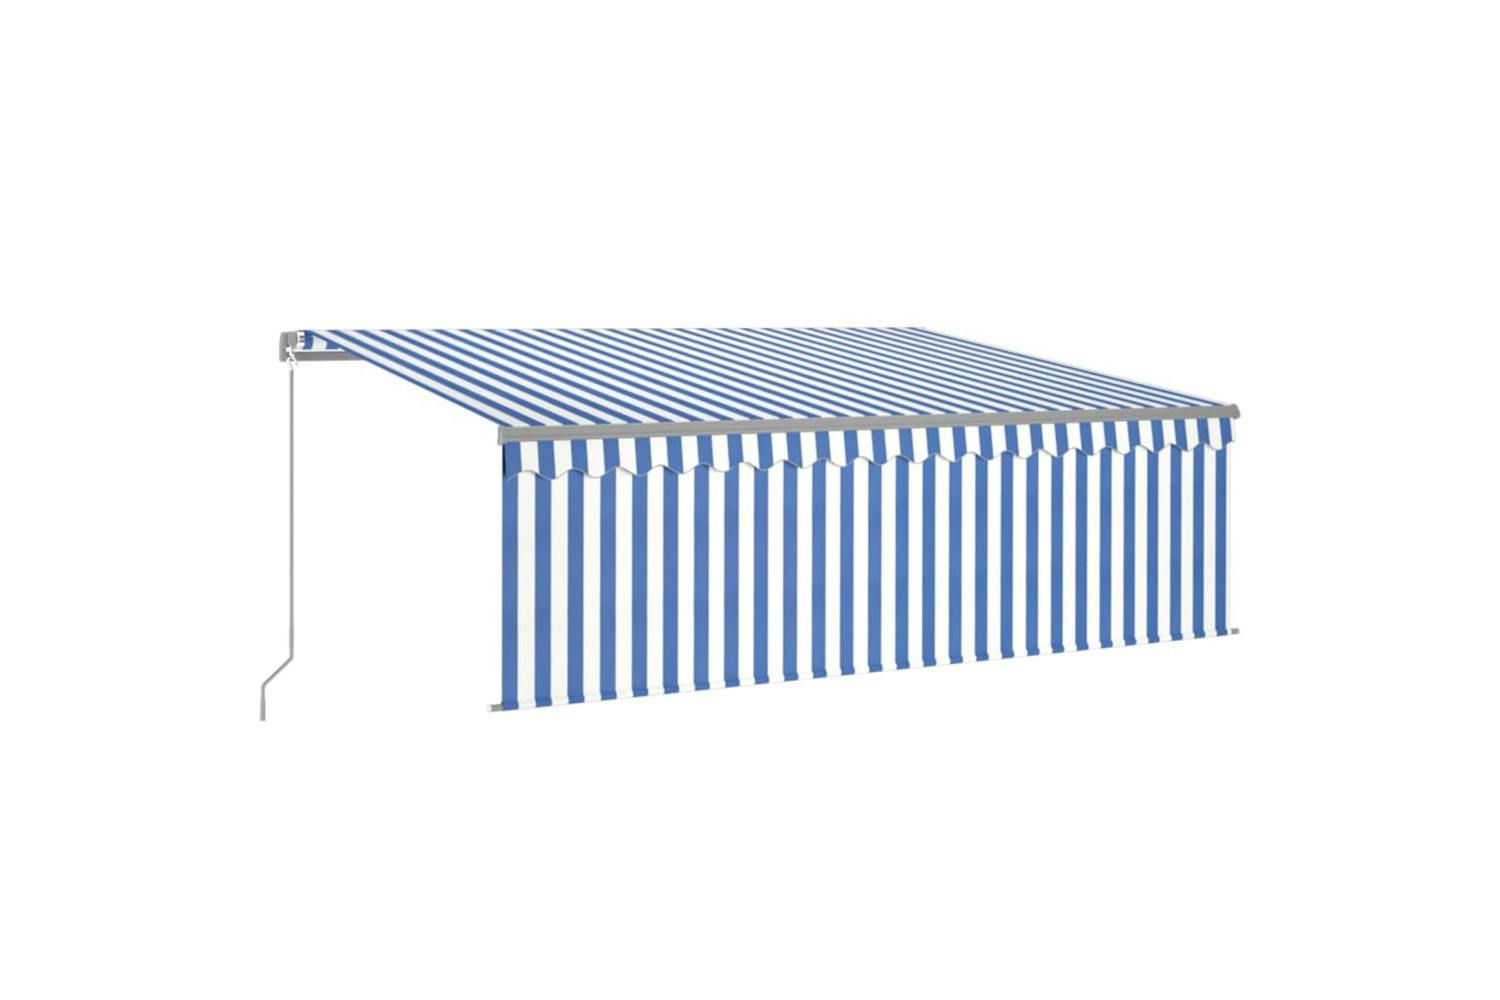 Vidaxl 3069416 Manual Retractable Awning With Blind 4x3m Blue&white